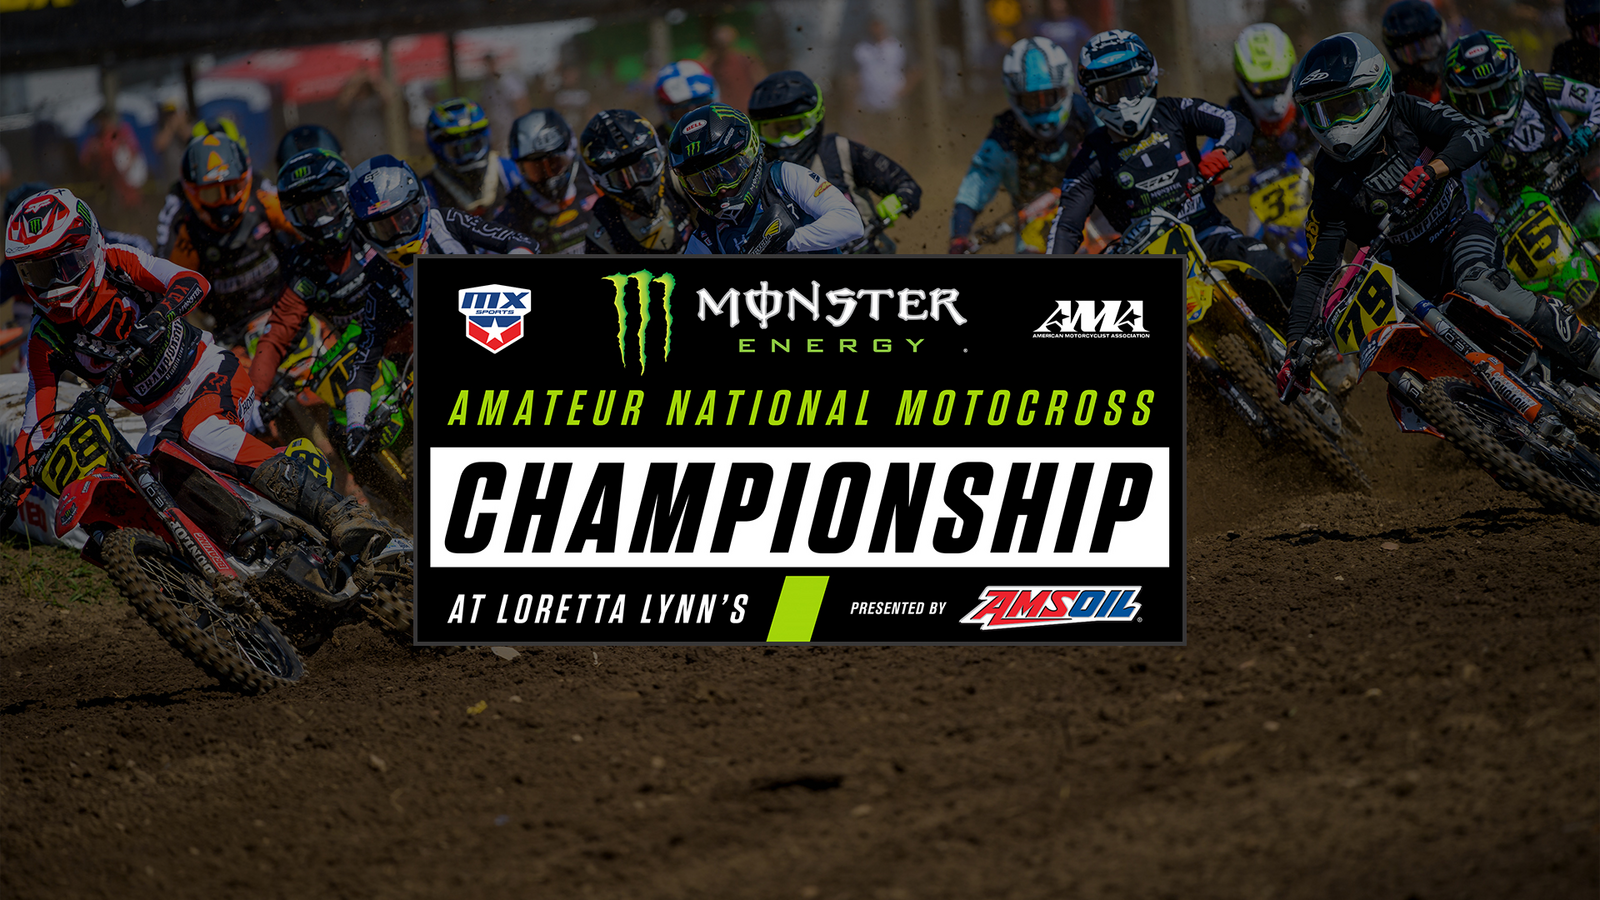 July 31st through August 5th is the Monster Energy AMA Amateur National Motocross Championship